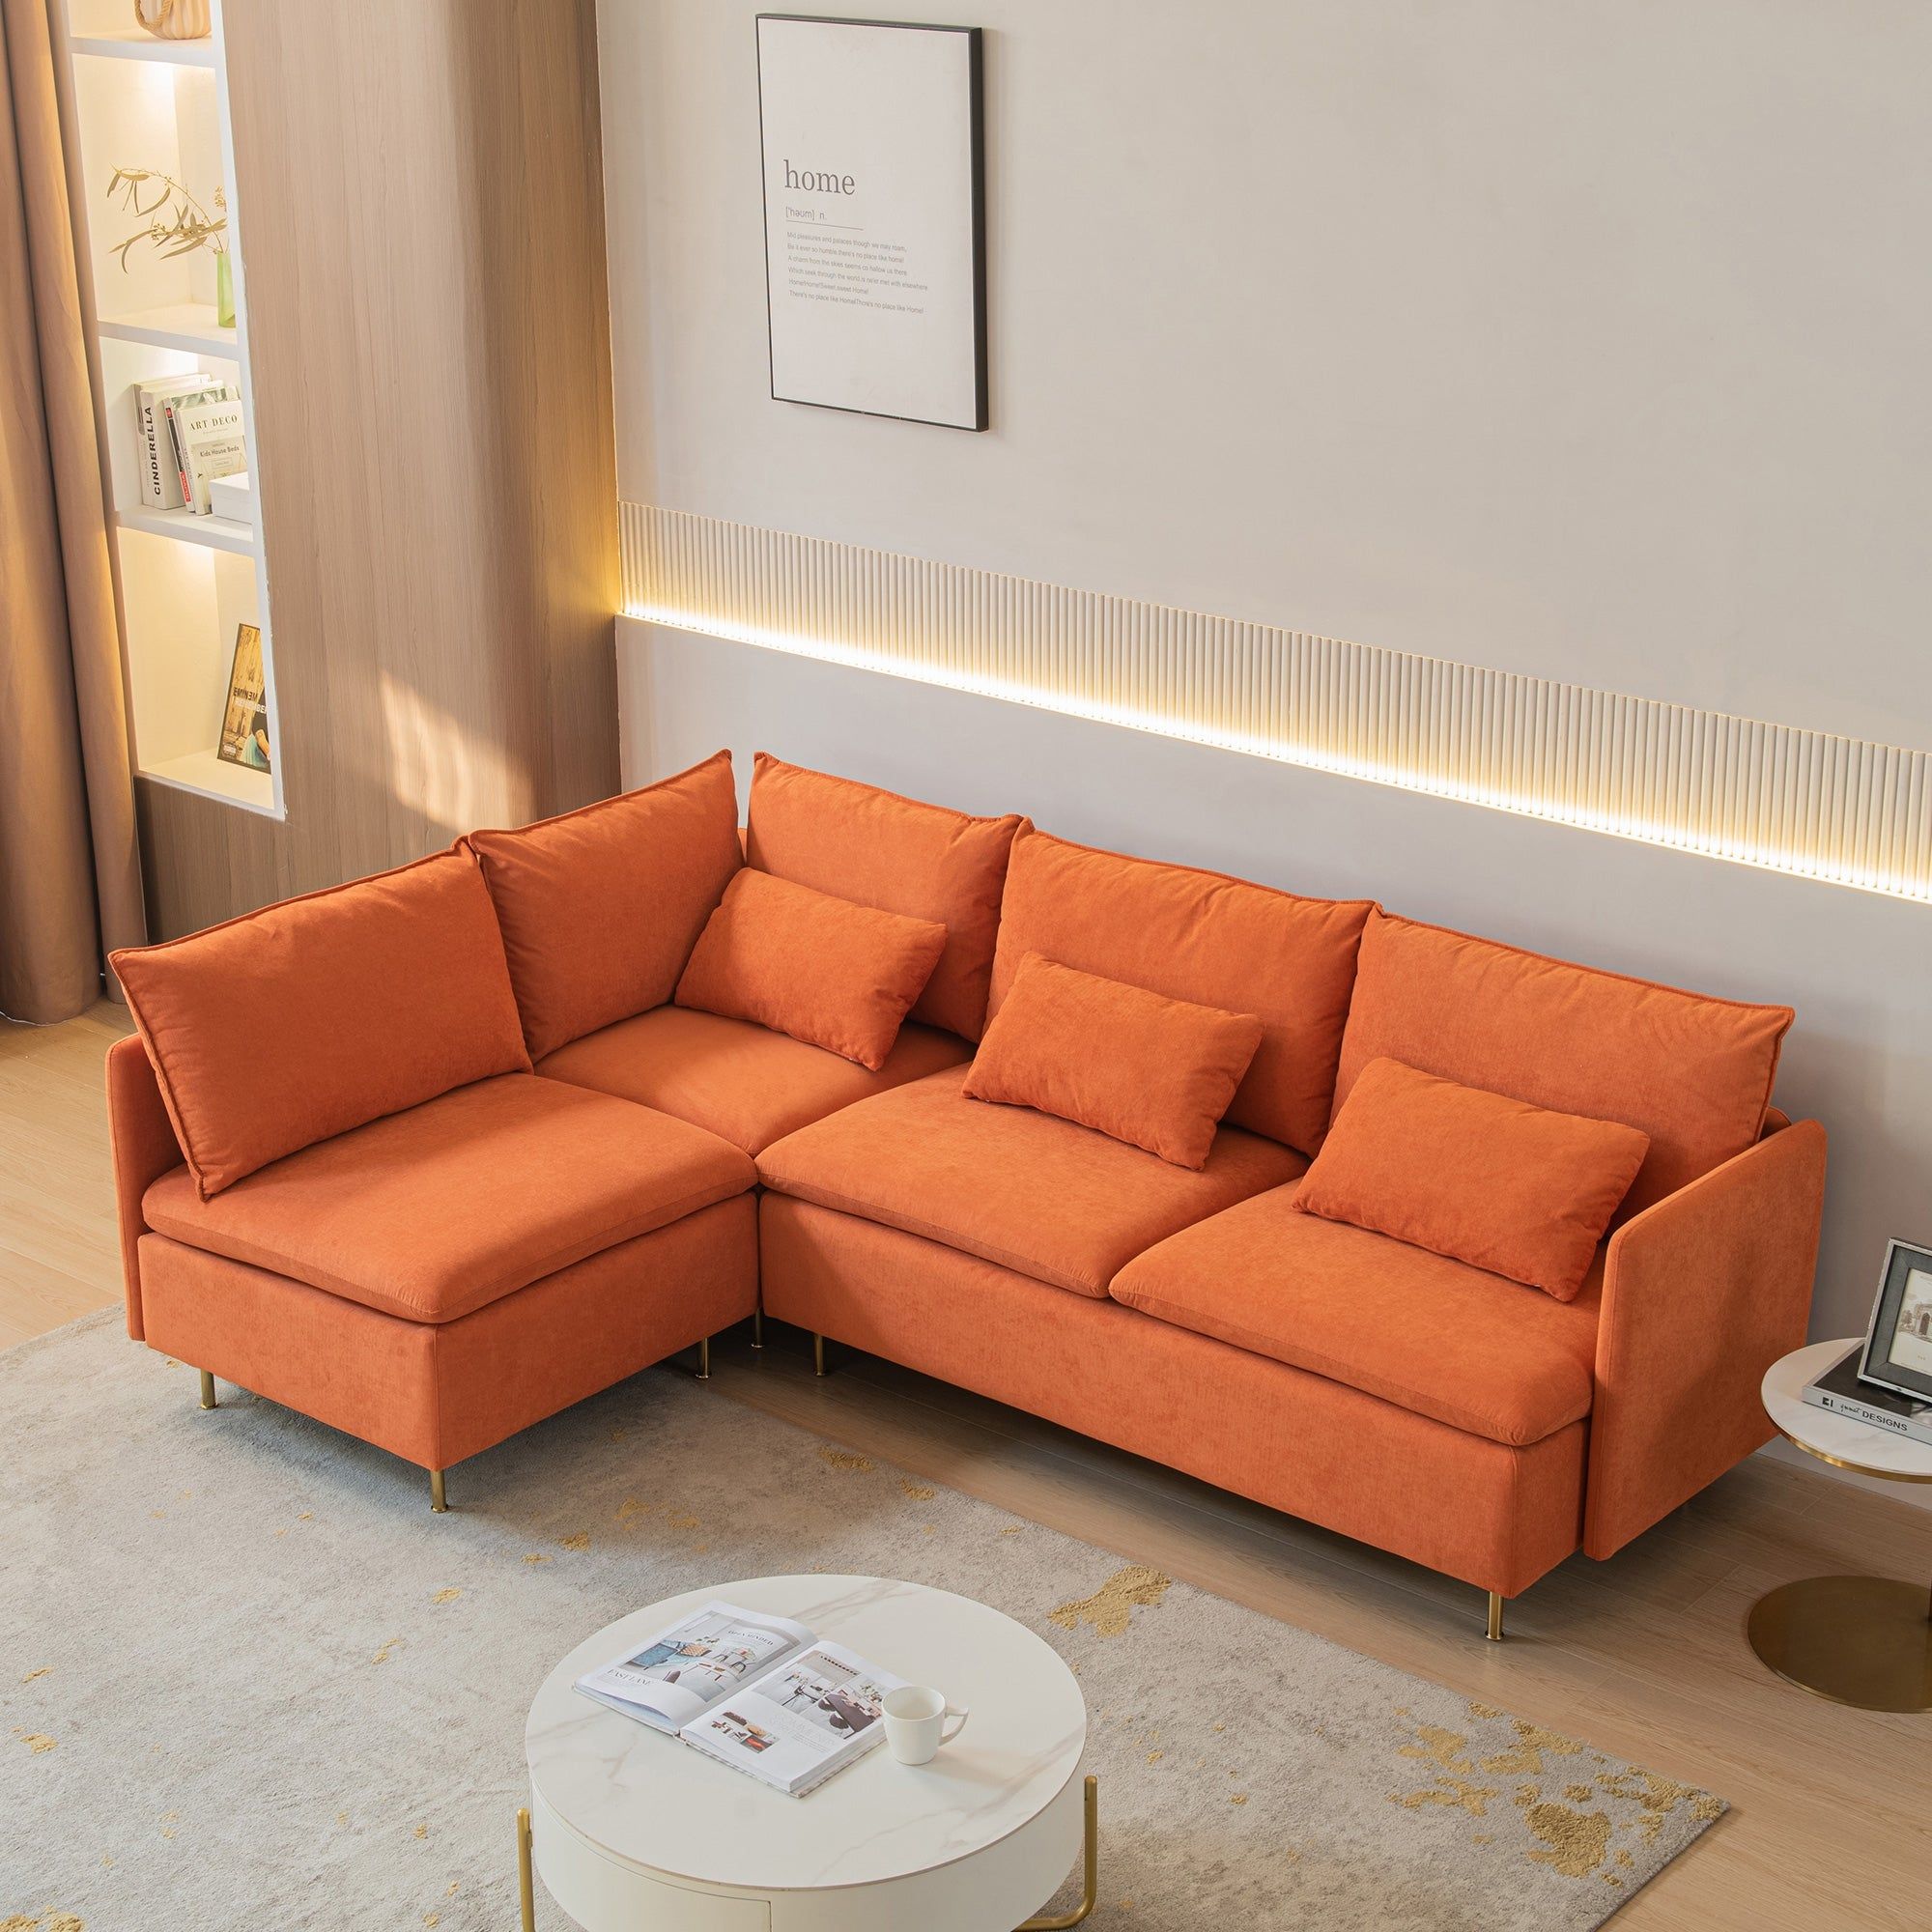 The Ultimate in Comfort and Flexibility: The Armless Sectional Sofa